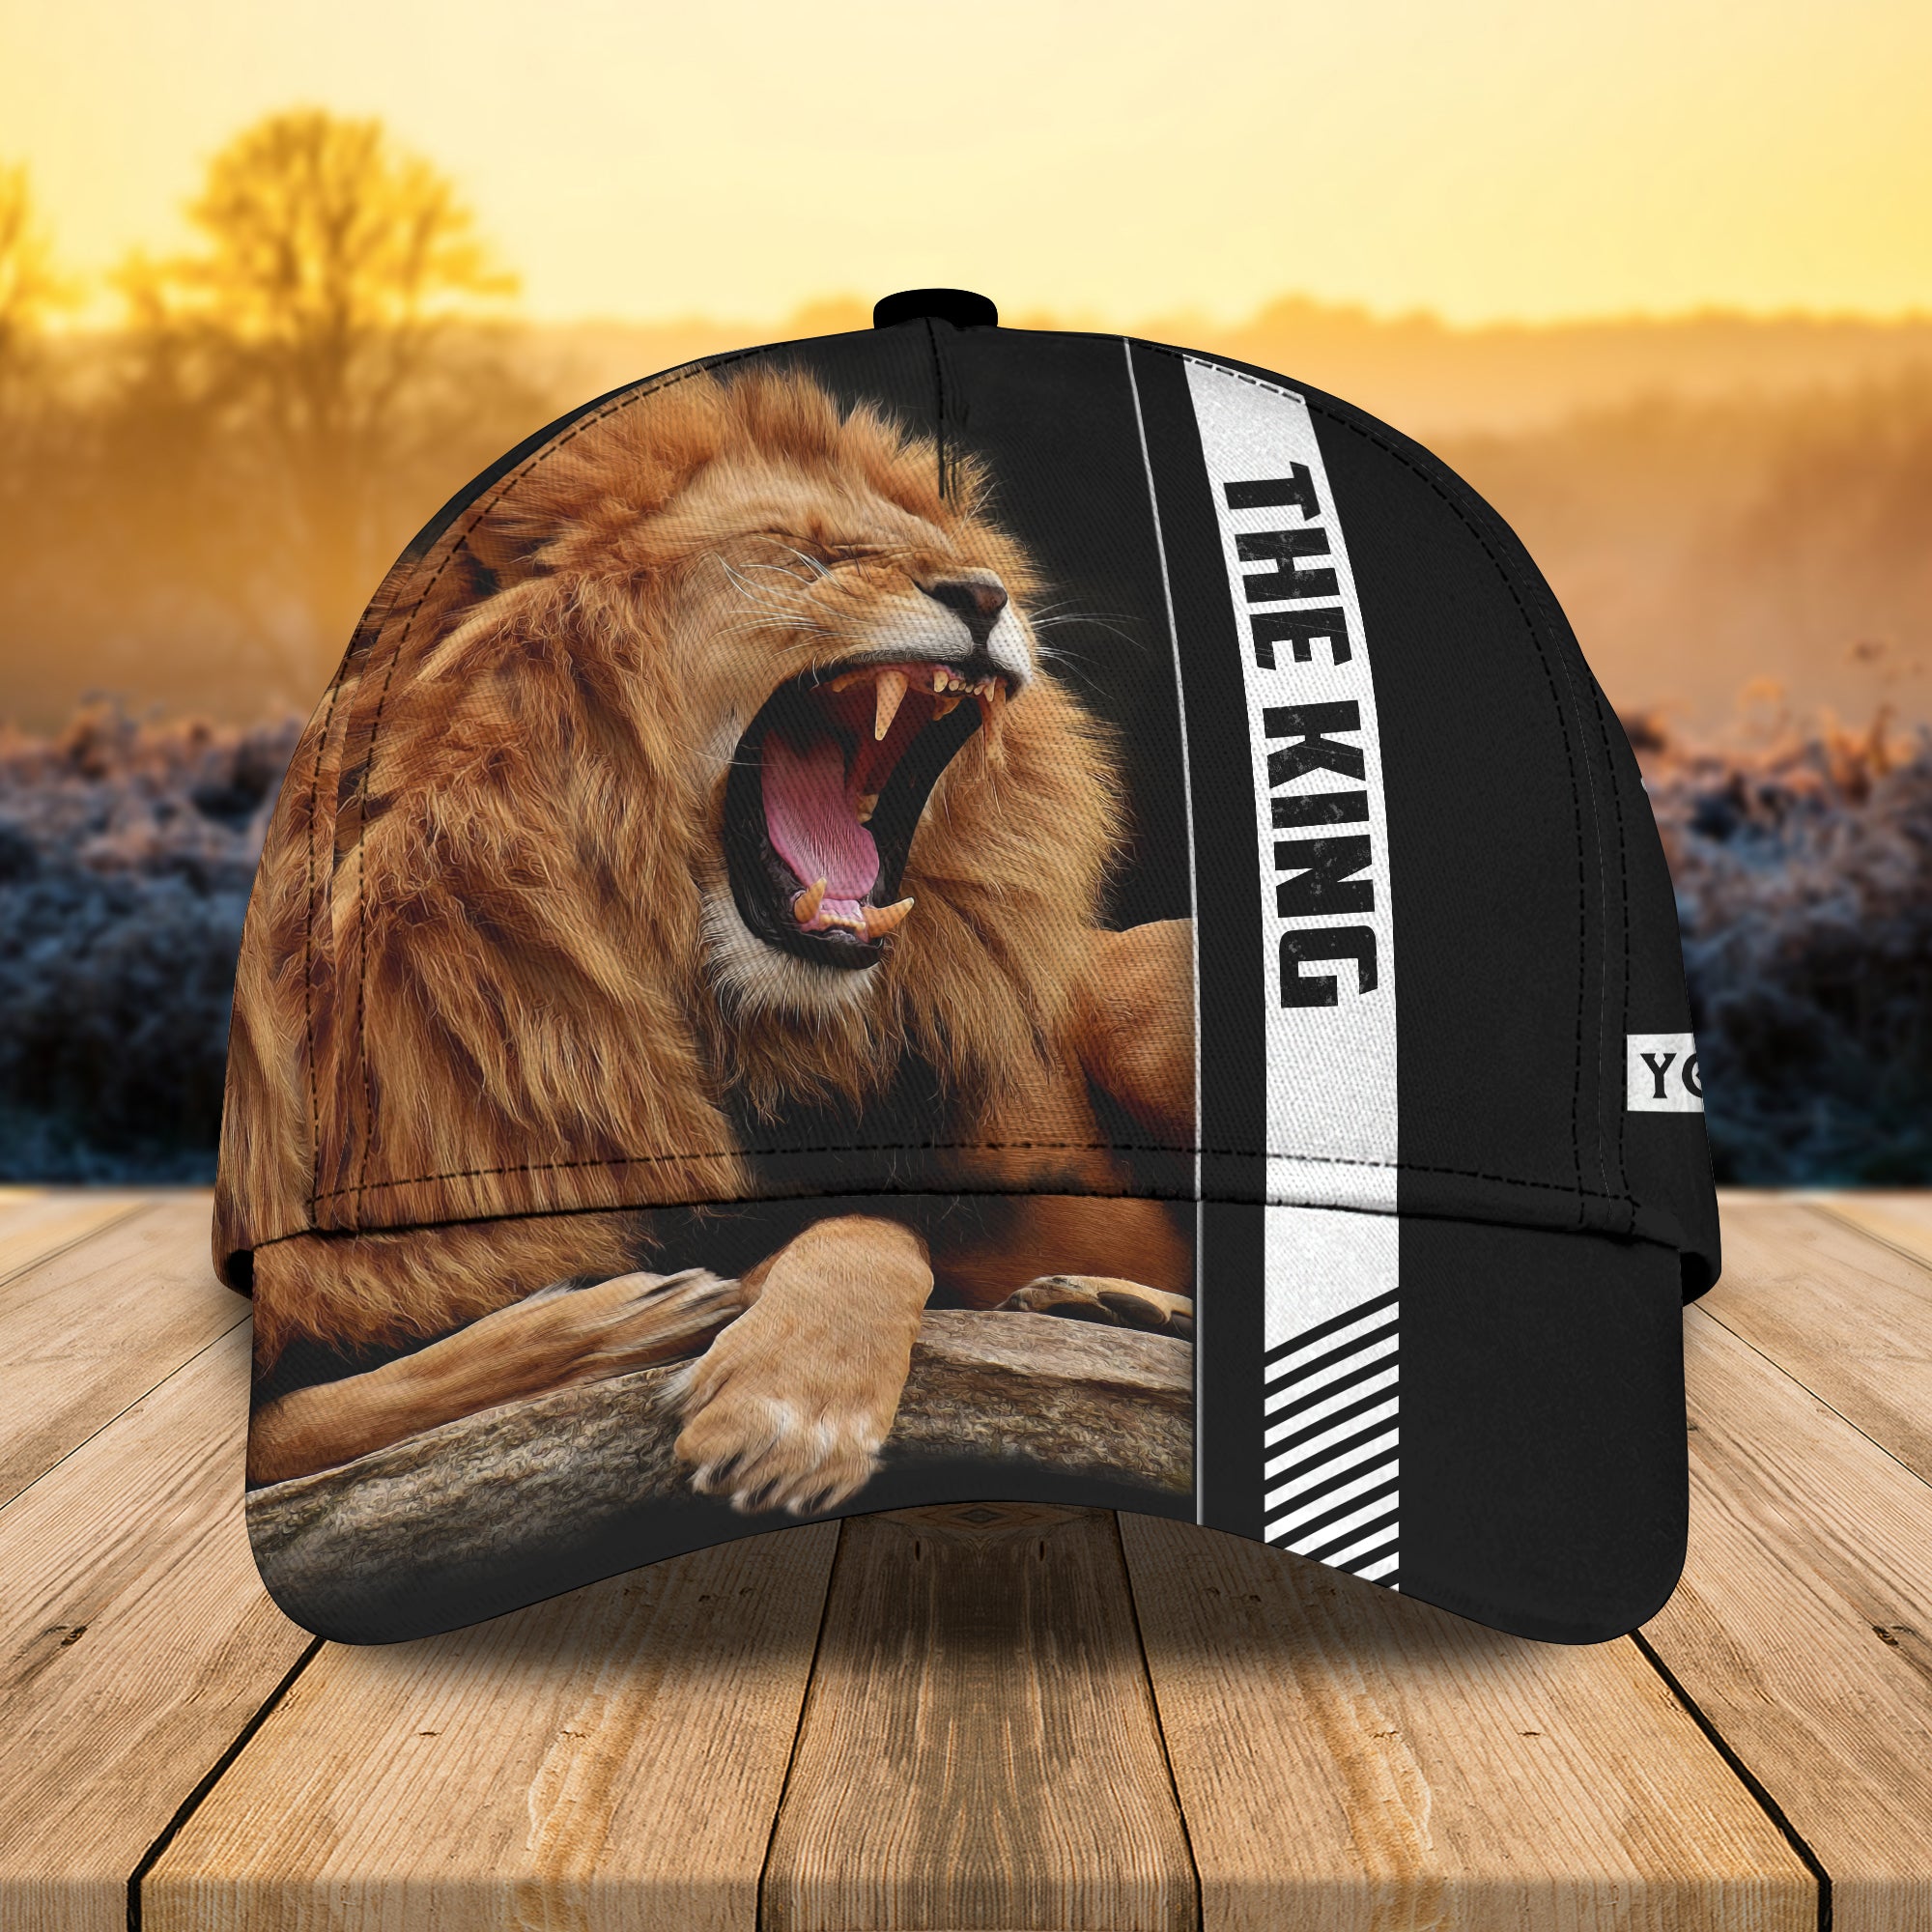 The Lion King - Personalized Name Cap - Nsd99